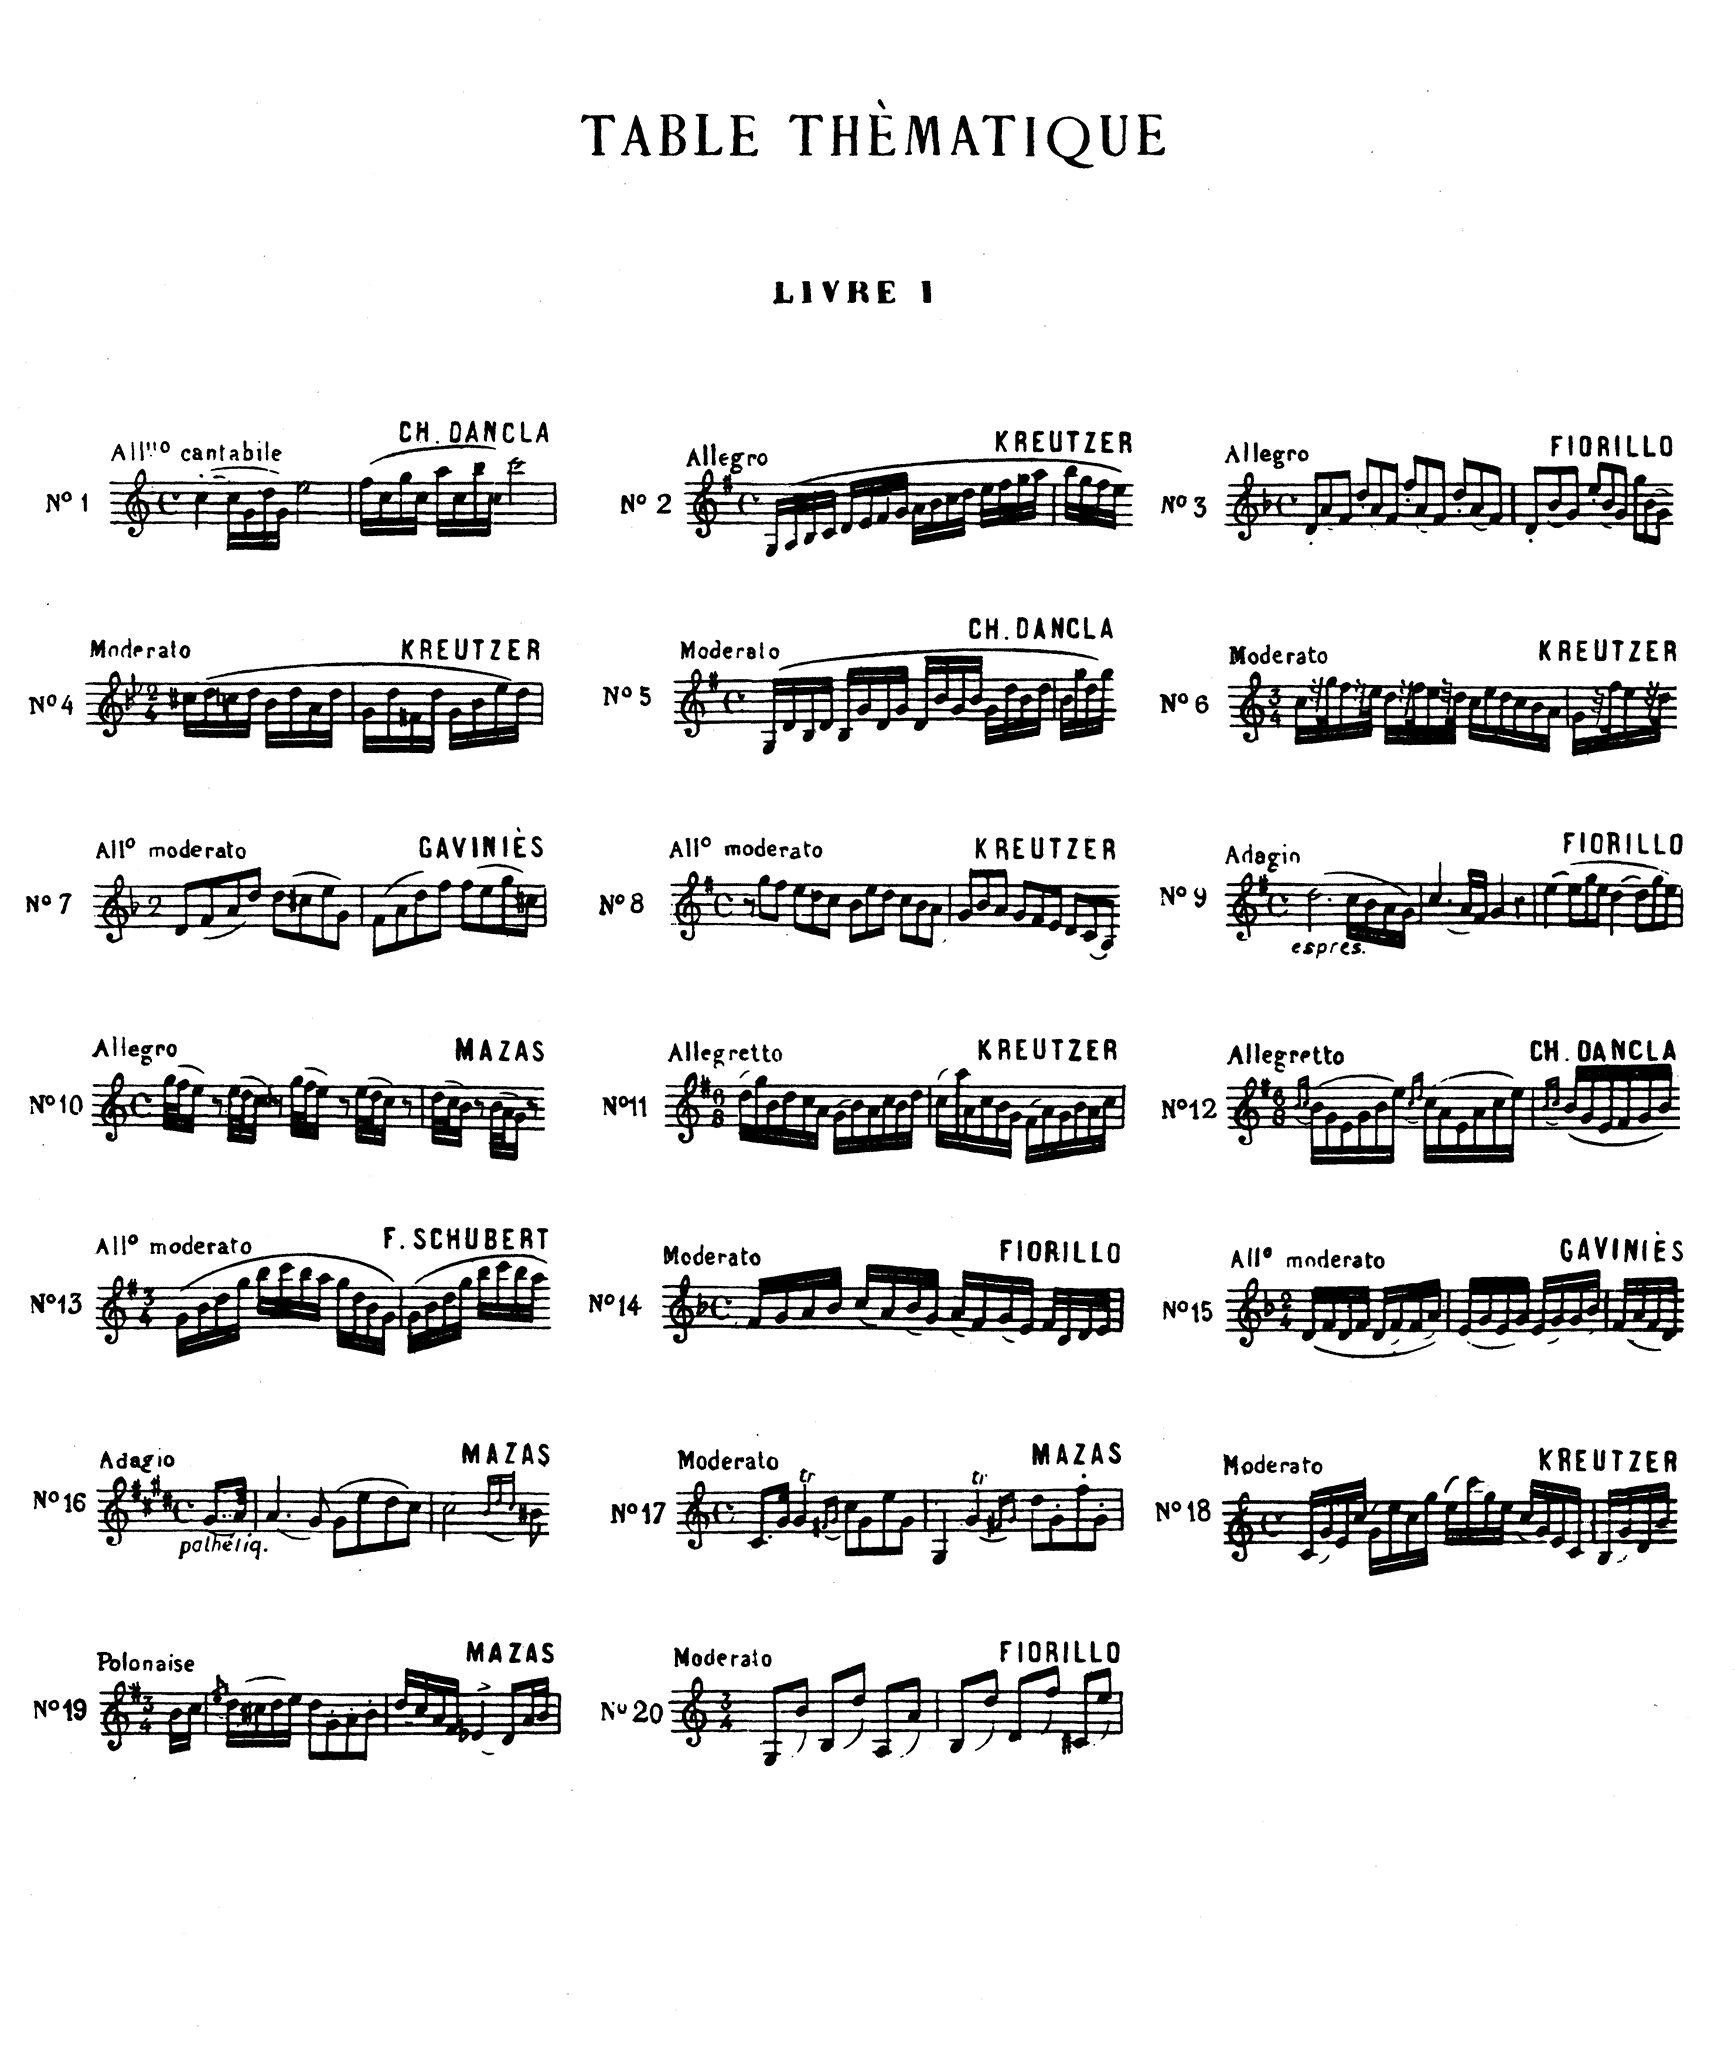 40 Etudes for Clarinet, Book 1 of 2 Thematic index